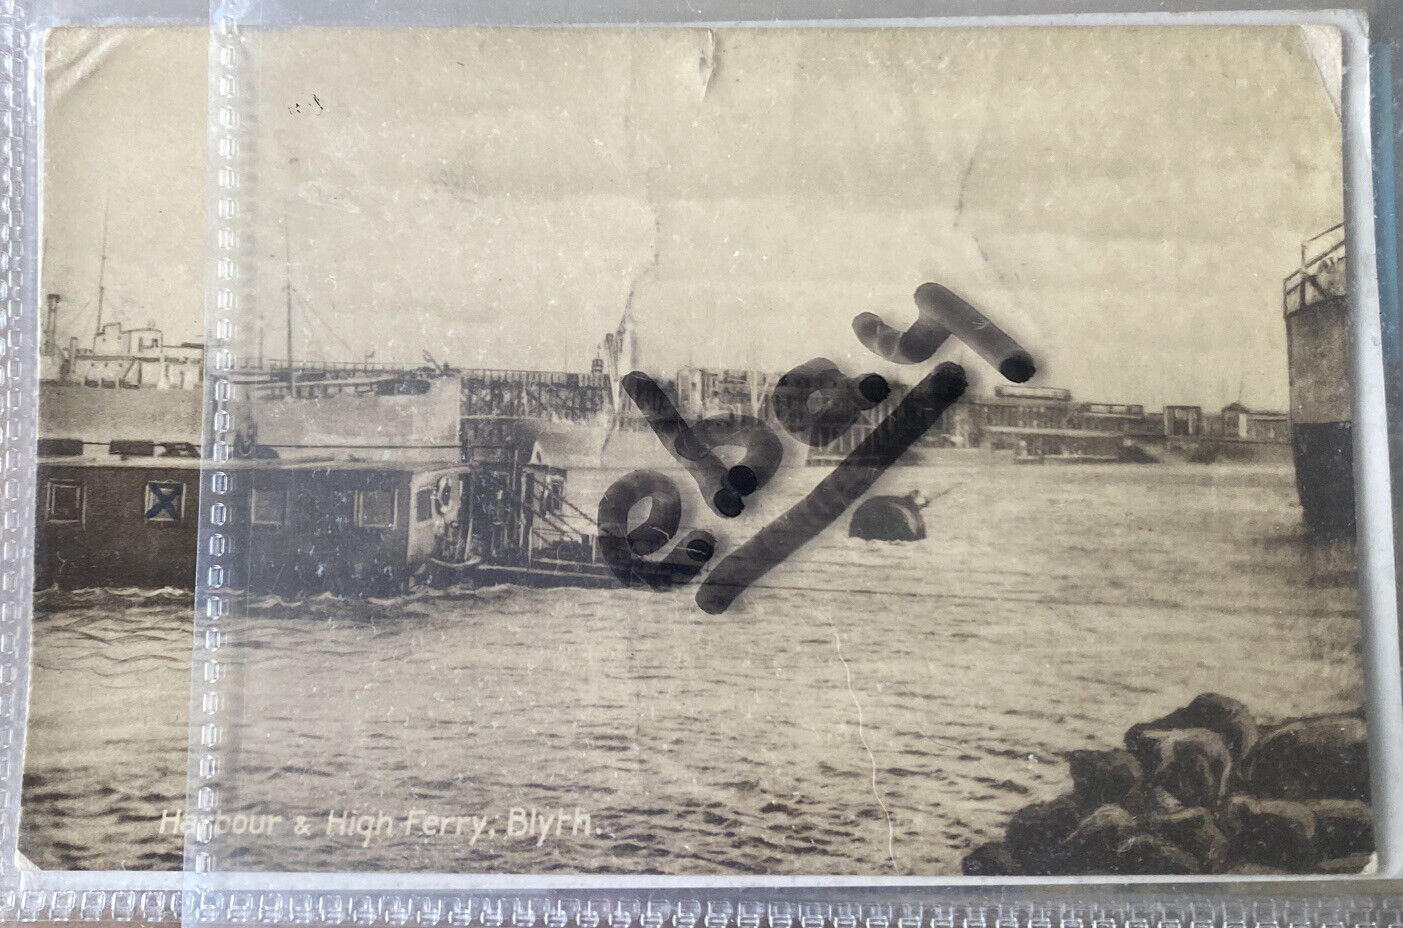 House Clearance - BLYTH VINTAGE RP POSTCARD USED 1917 OF HIGH FERRY & HARBOUR CREASES WAF